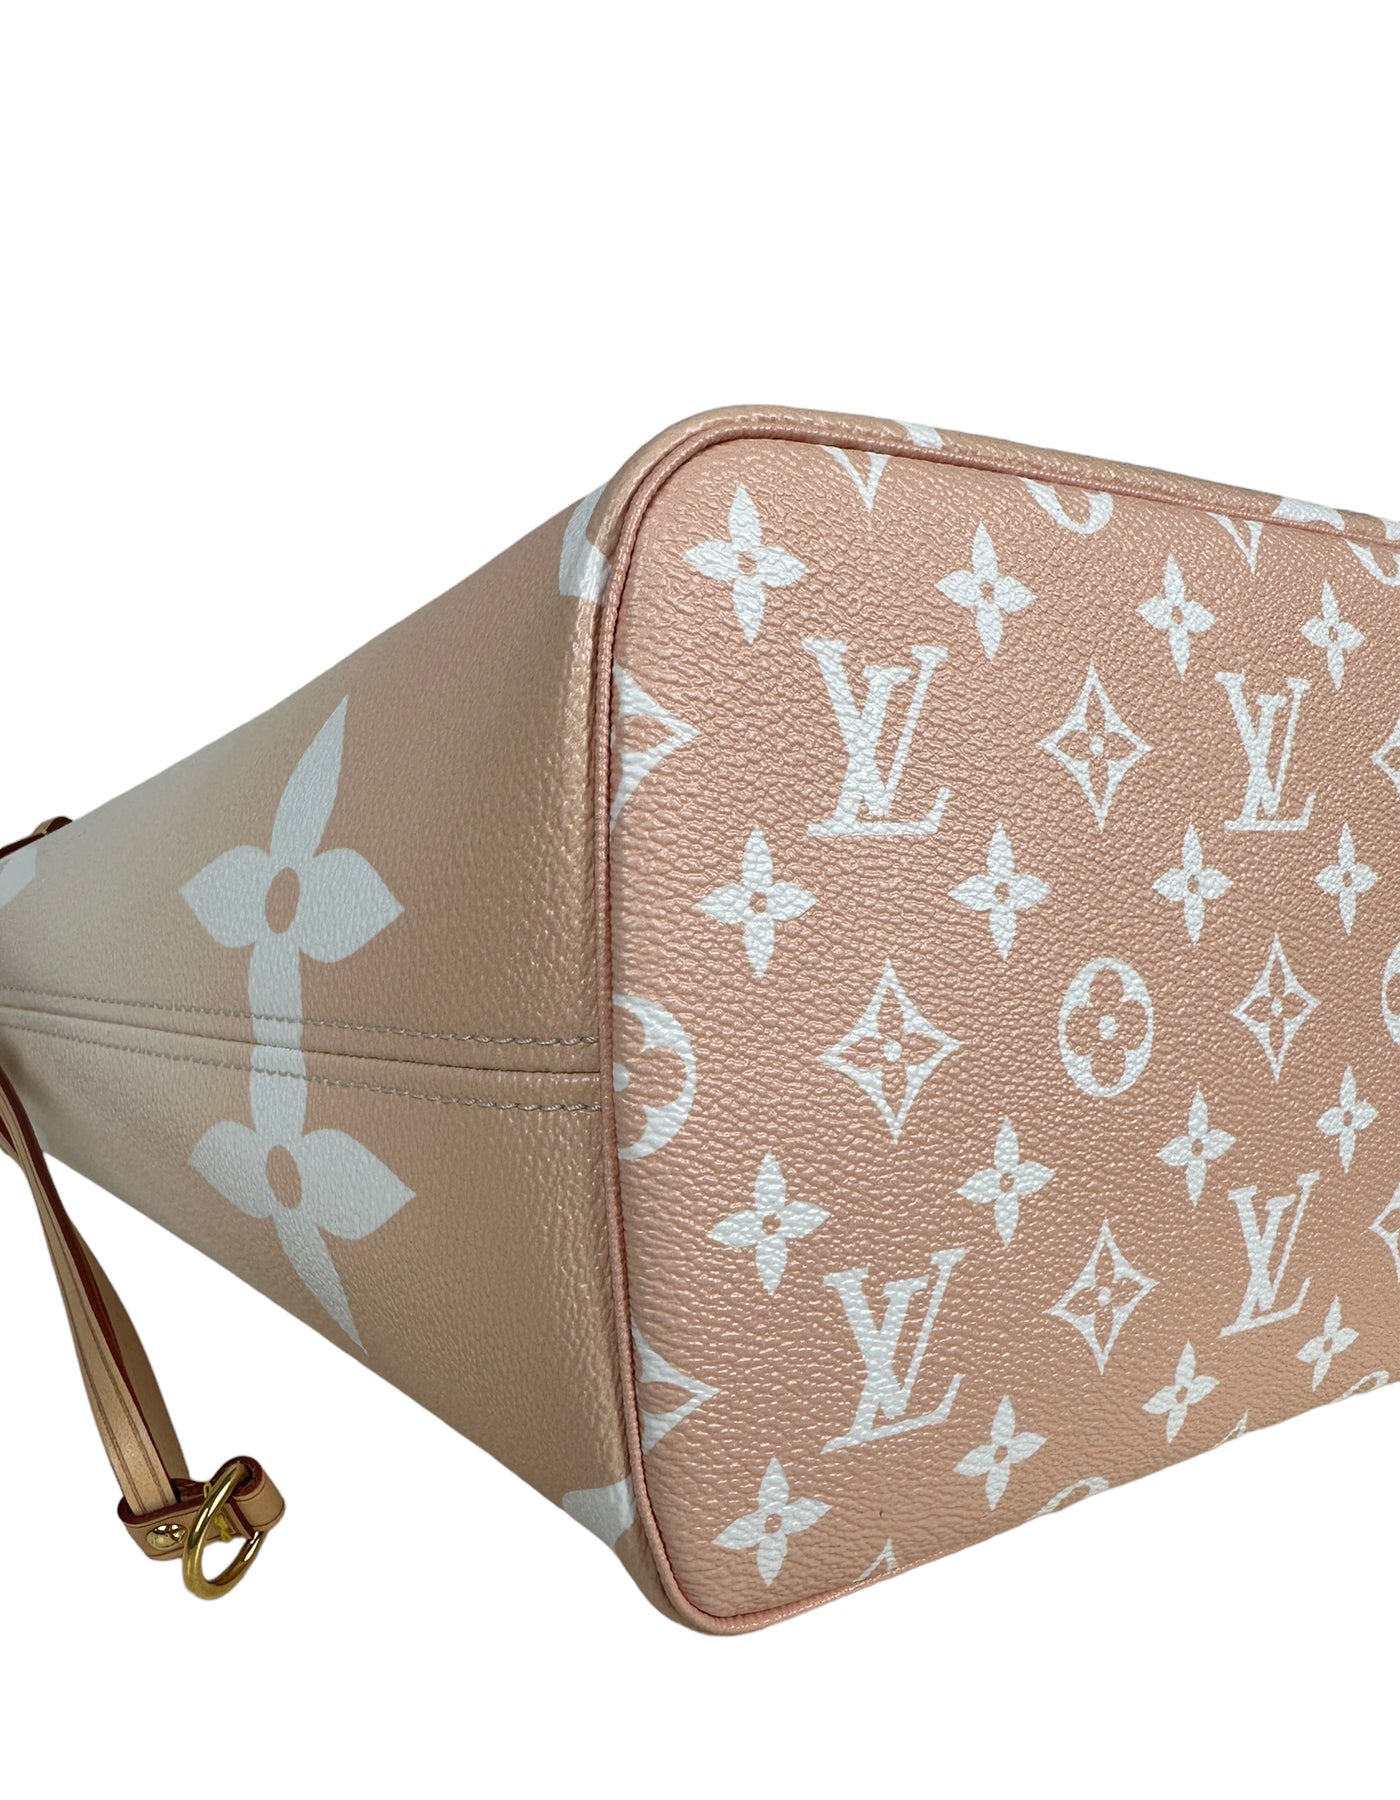 Louis Vuitton Neverfull mm by The Pool Monogram Giant Tote Bag Brume